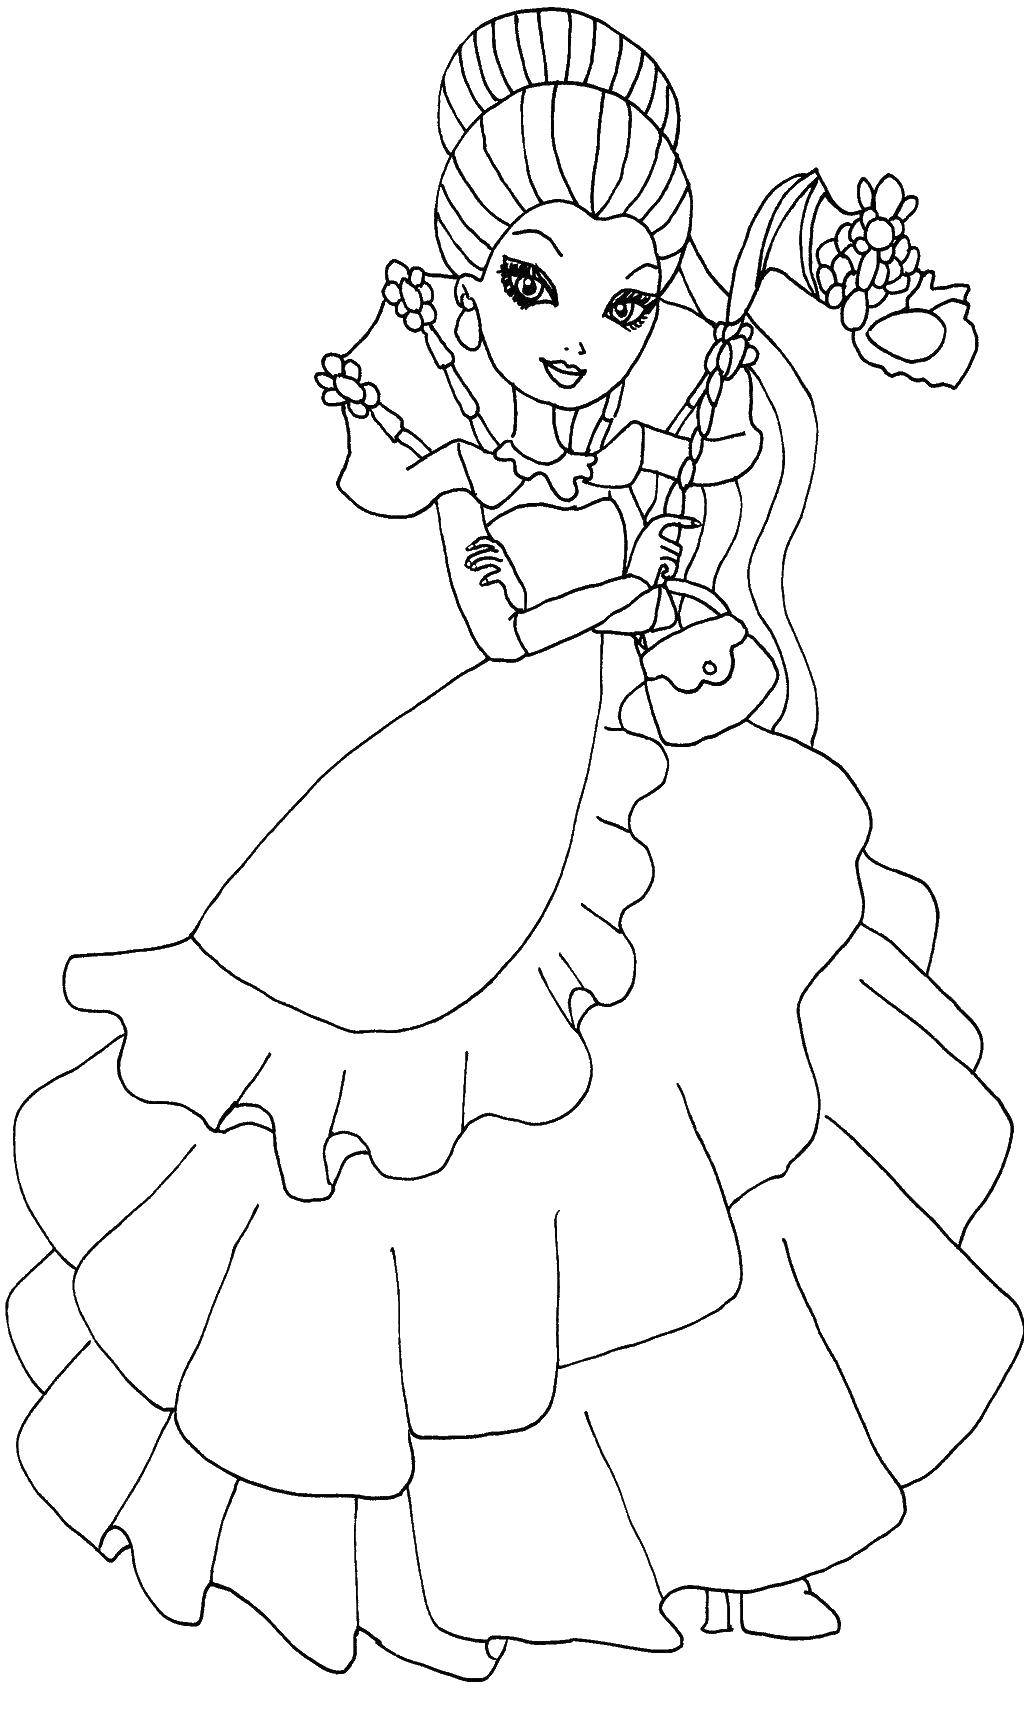 Coloring Queen in a beautiful dress. Category The Queen. Tags:  Queen, crown, dress.